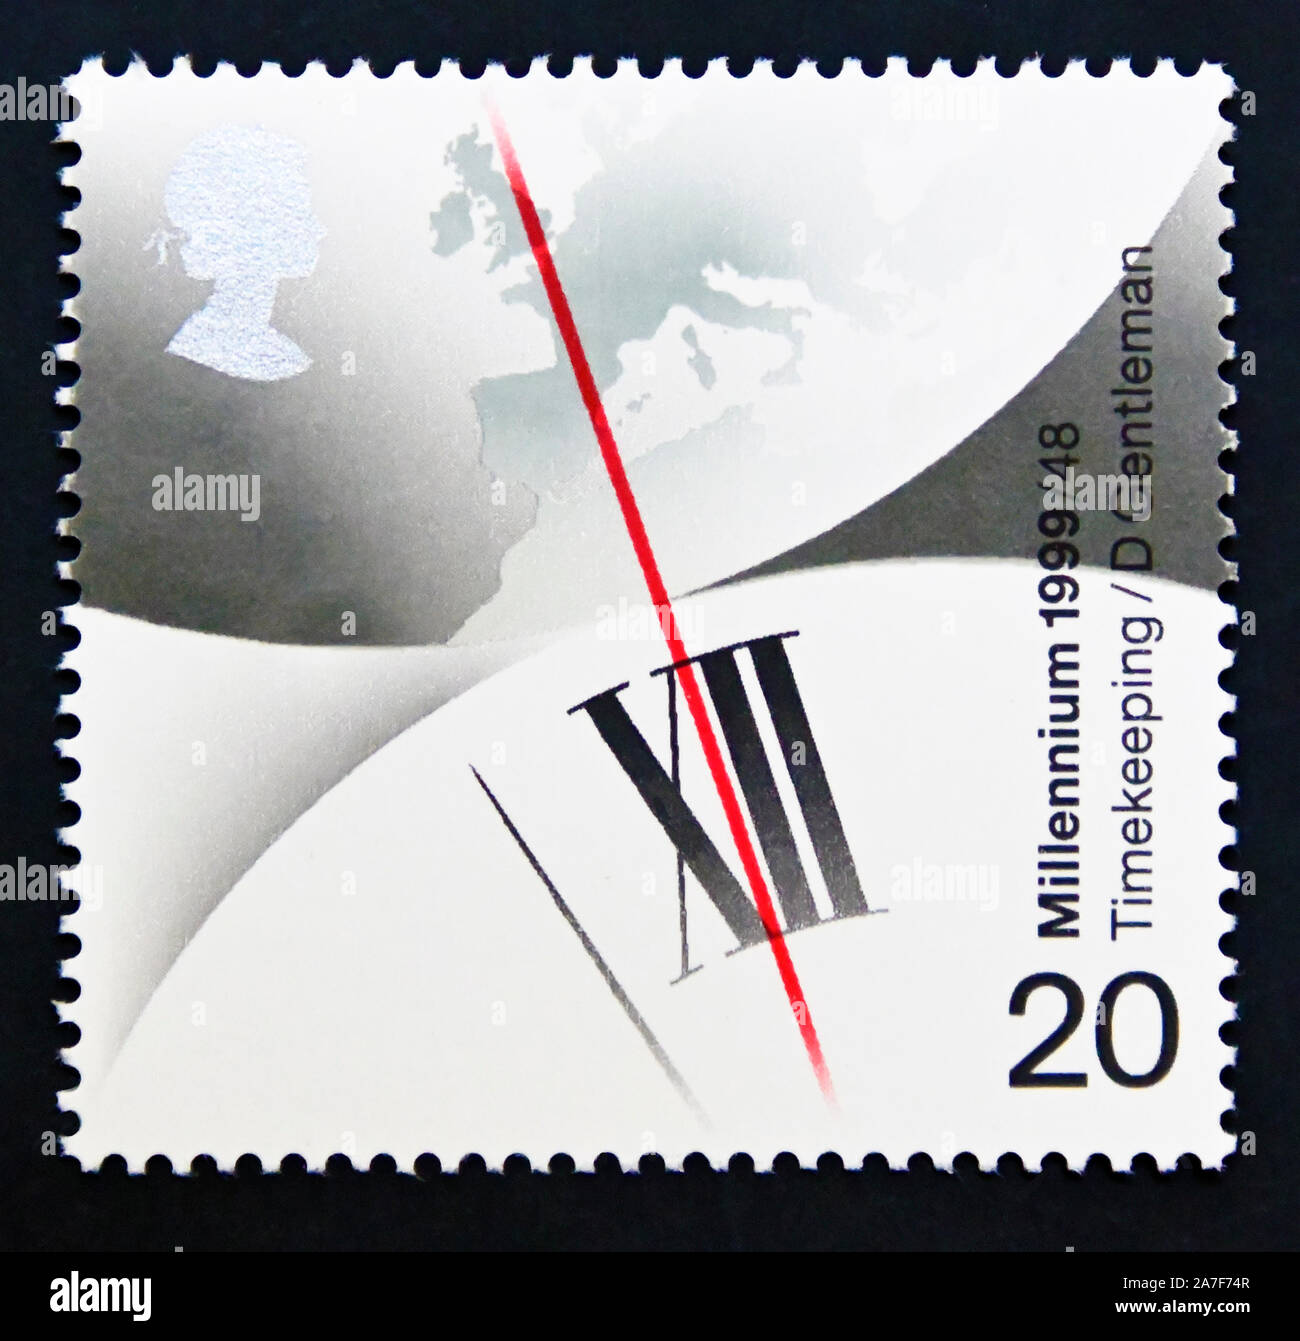 Postage stamp. Great Britain. Queen Elizabeth II. Millennium Series. The Inventors' Tale. Greenwich Meridian and Clock (John Harrison's Chronometer). Stock Photo